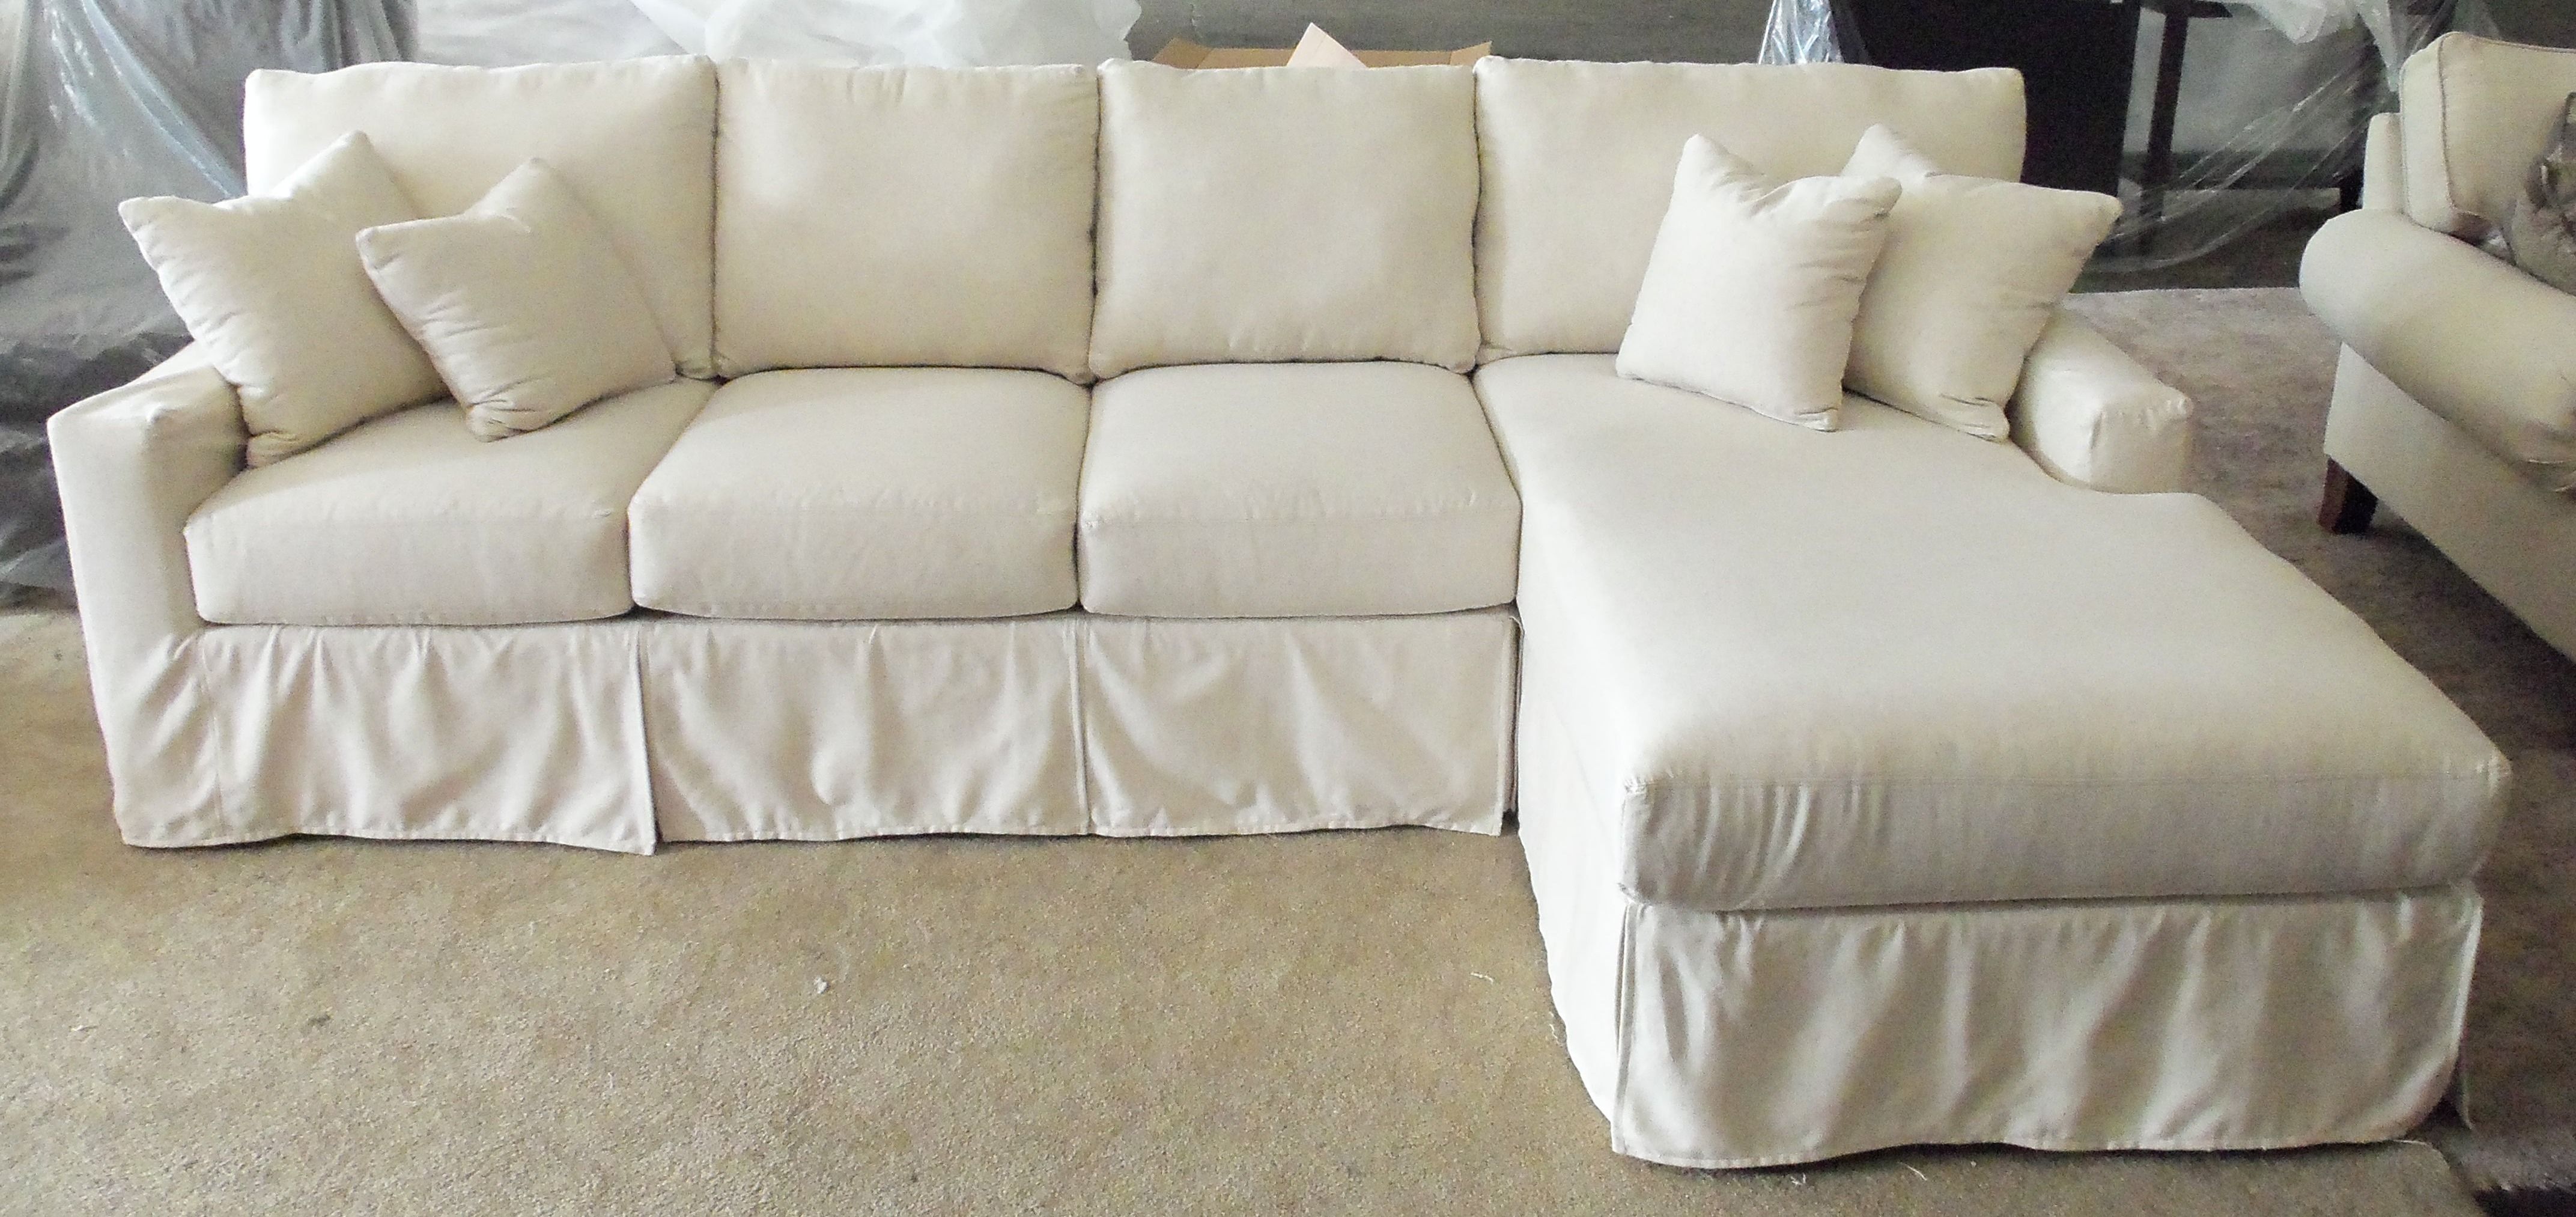 Fancy Slipcover Sectional Sofa 96 In Sofas And Couches Set With In Contemporary Sofa Slipcovers (View 5 of 15)